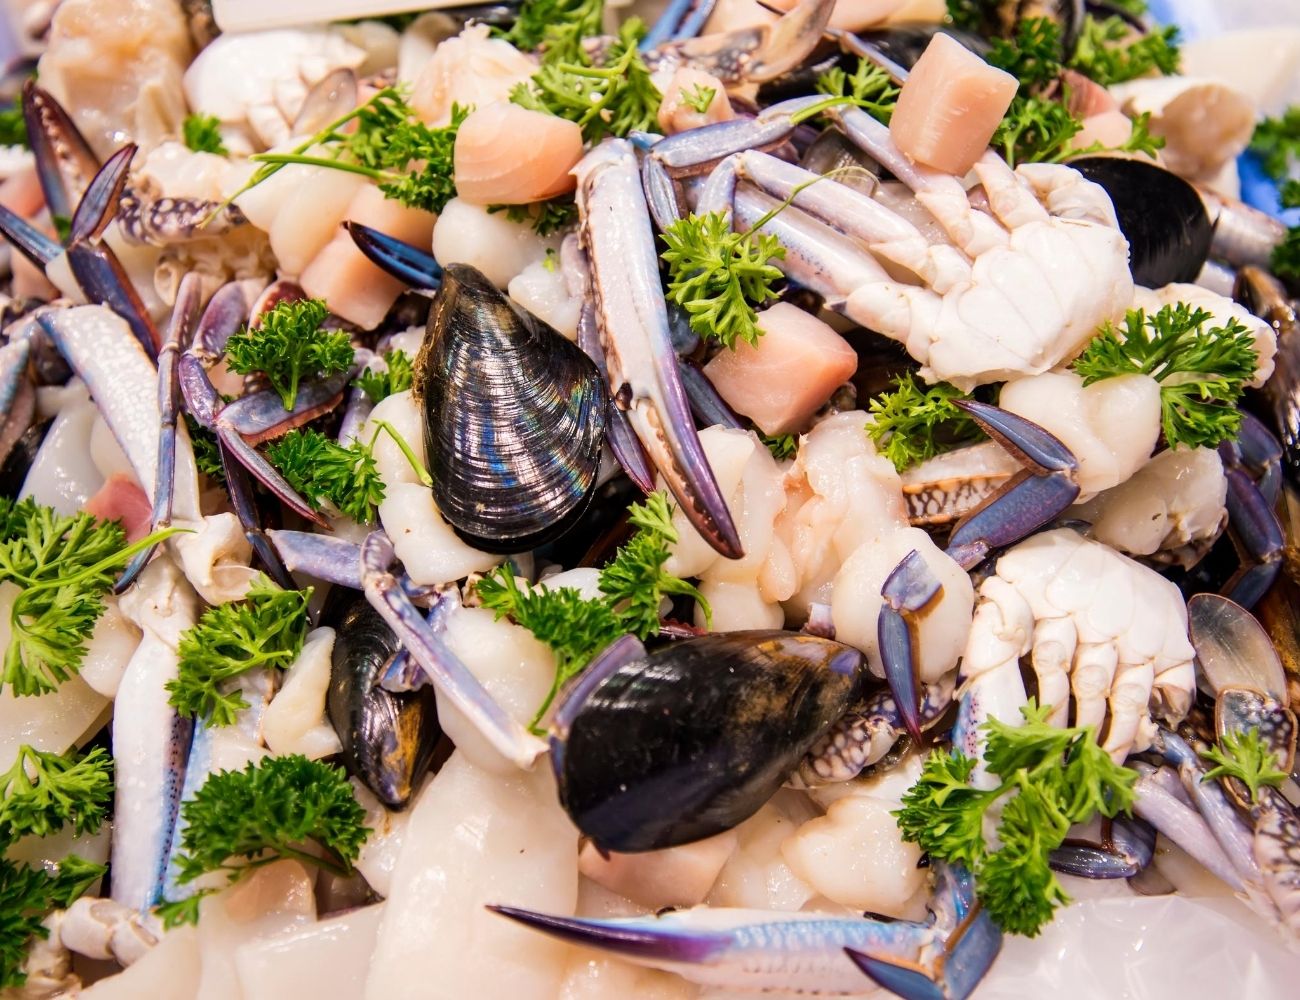 Benefits of Seafood in Your Diet